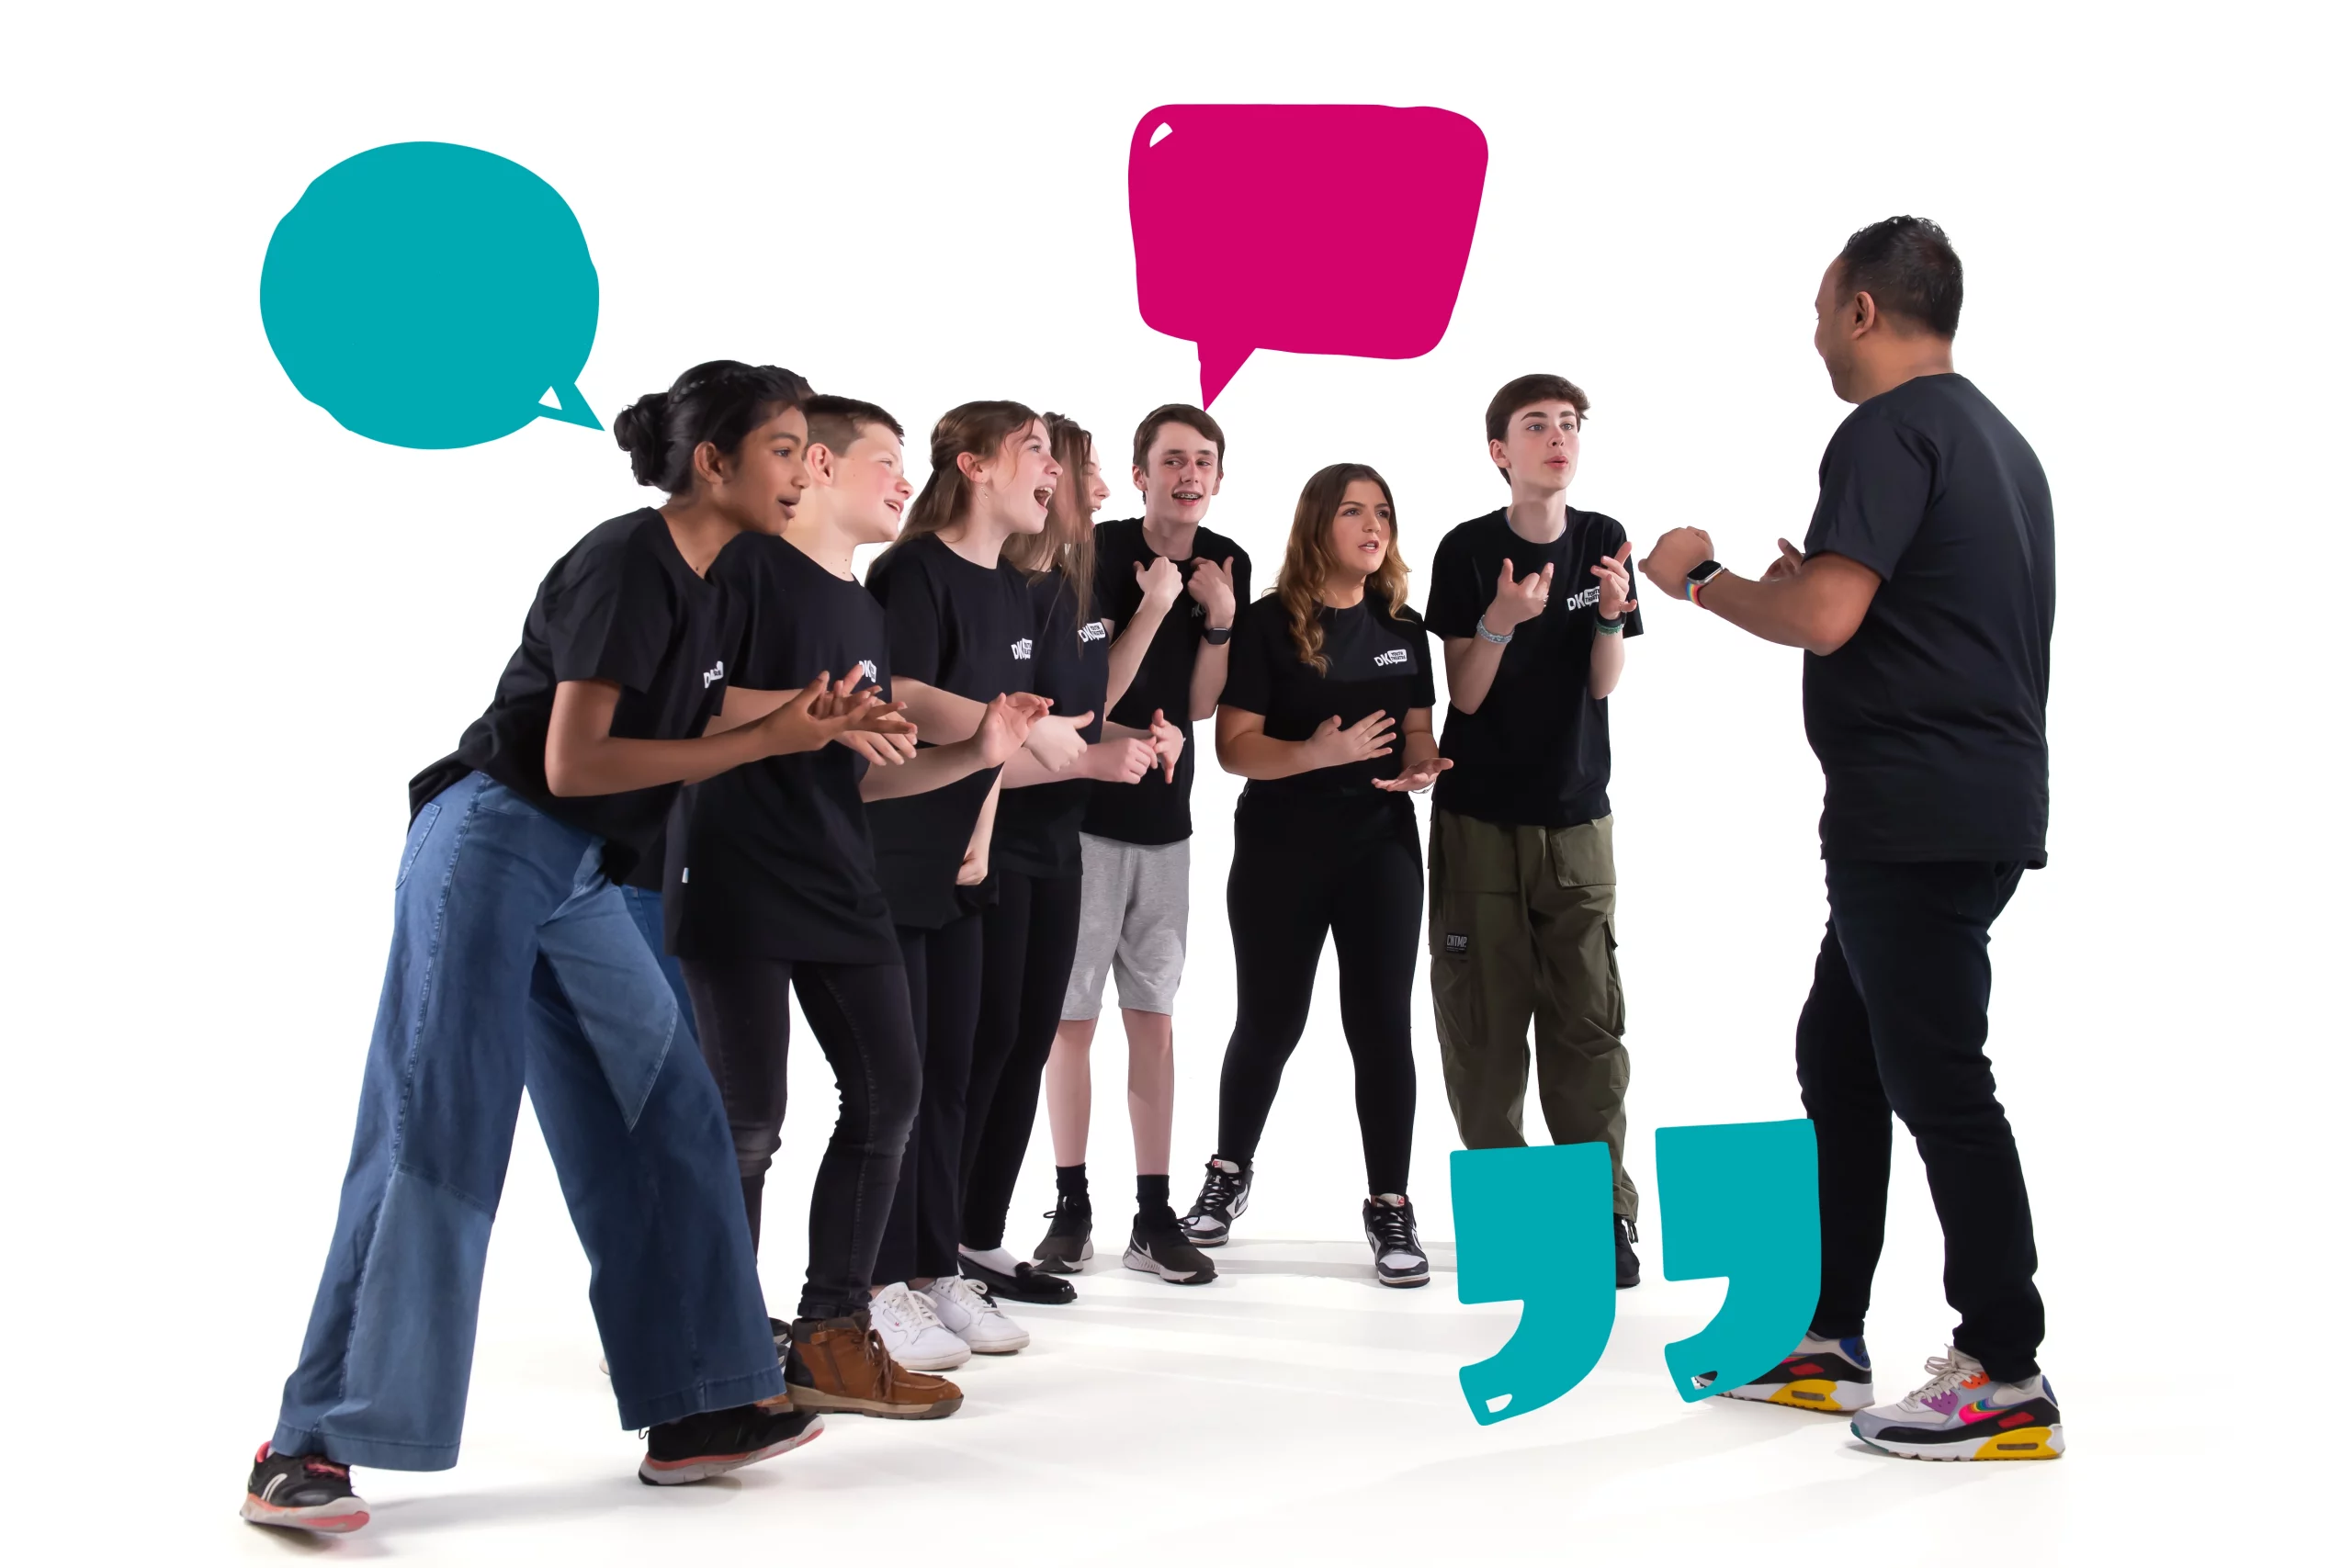 About Drama Kids Curriculum-based drama classes to increase confidence, social skills, creativity and self-esteem. For children and teenagers aged 4-18.